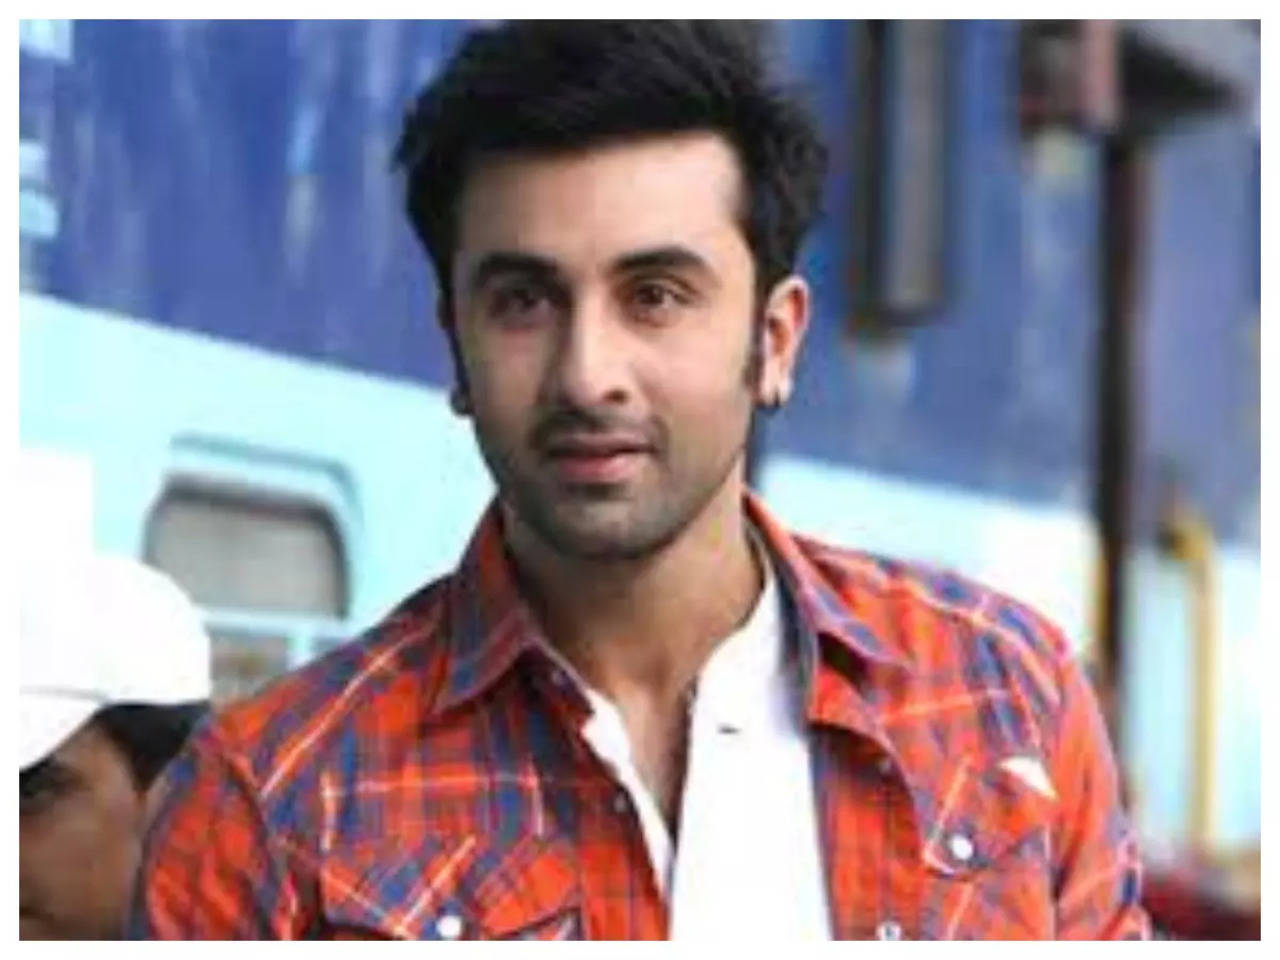 I totally believe that this is a far more deeper and richer film.” – Ranbir  Kapoor on his upcoming film Yeh Jawaani Hai Deewani